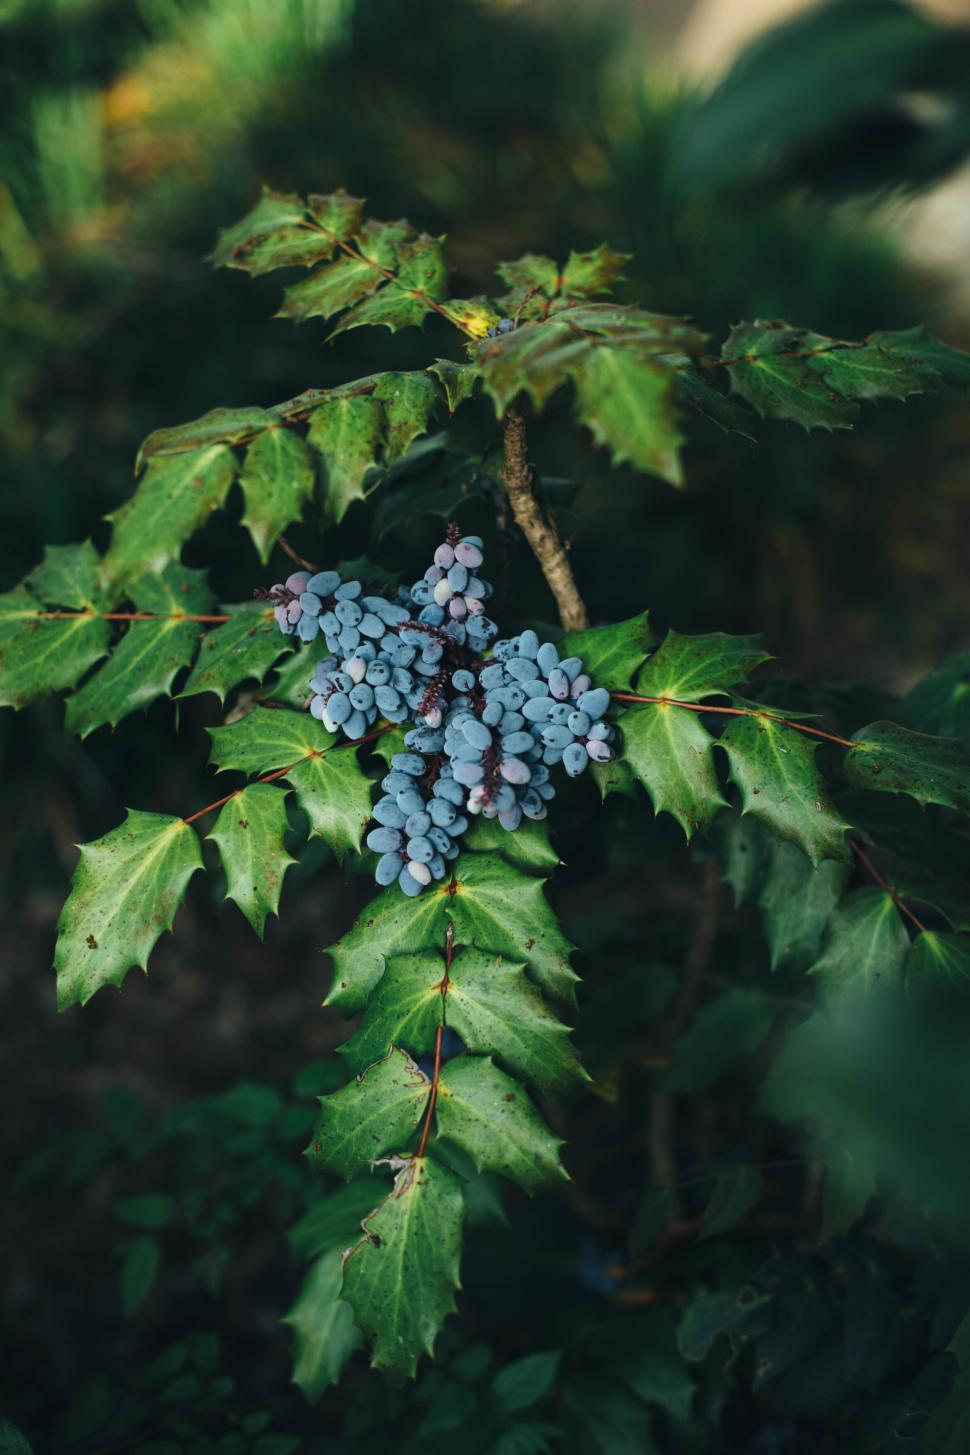 Free Image of Cluster of Berries Amidst Green Leaves 